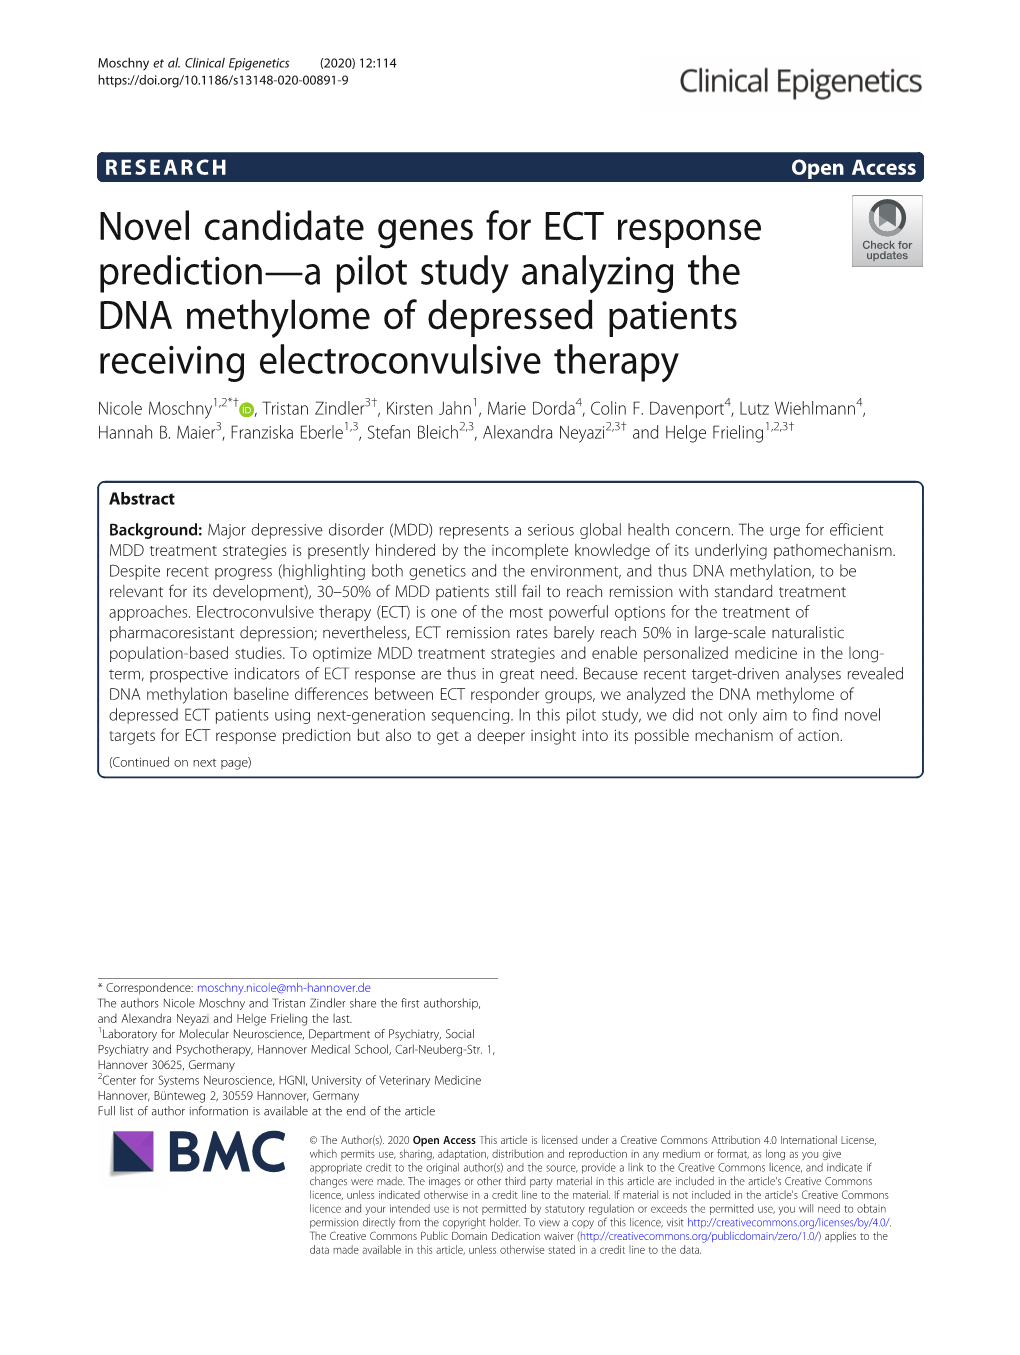 Novel Candidate Genes for ECT Response Prediction—A Pilot Study